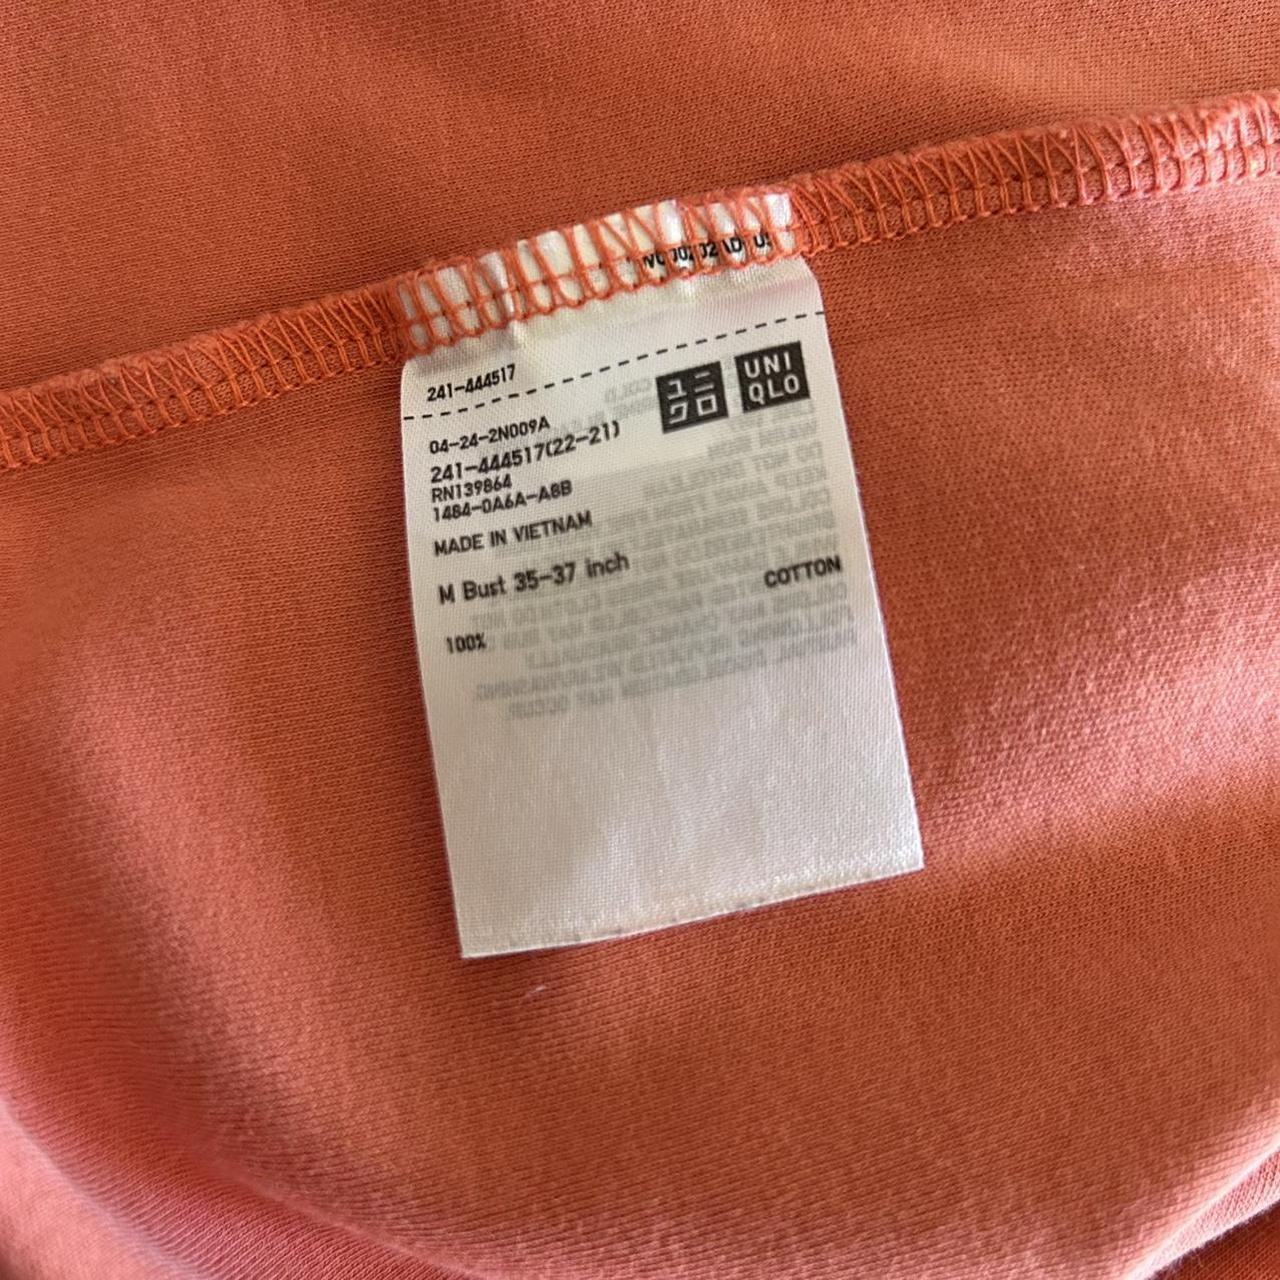 Look at this sexy orange jeggings from Uniqlo! Tag - Depop